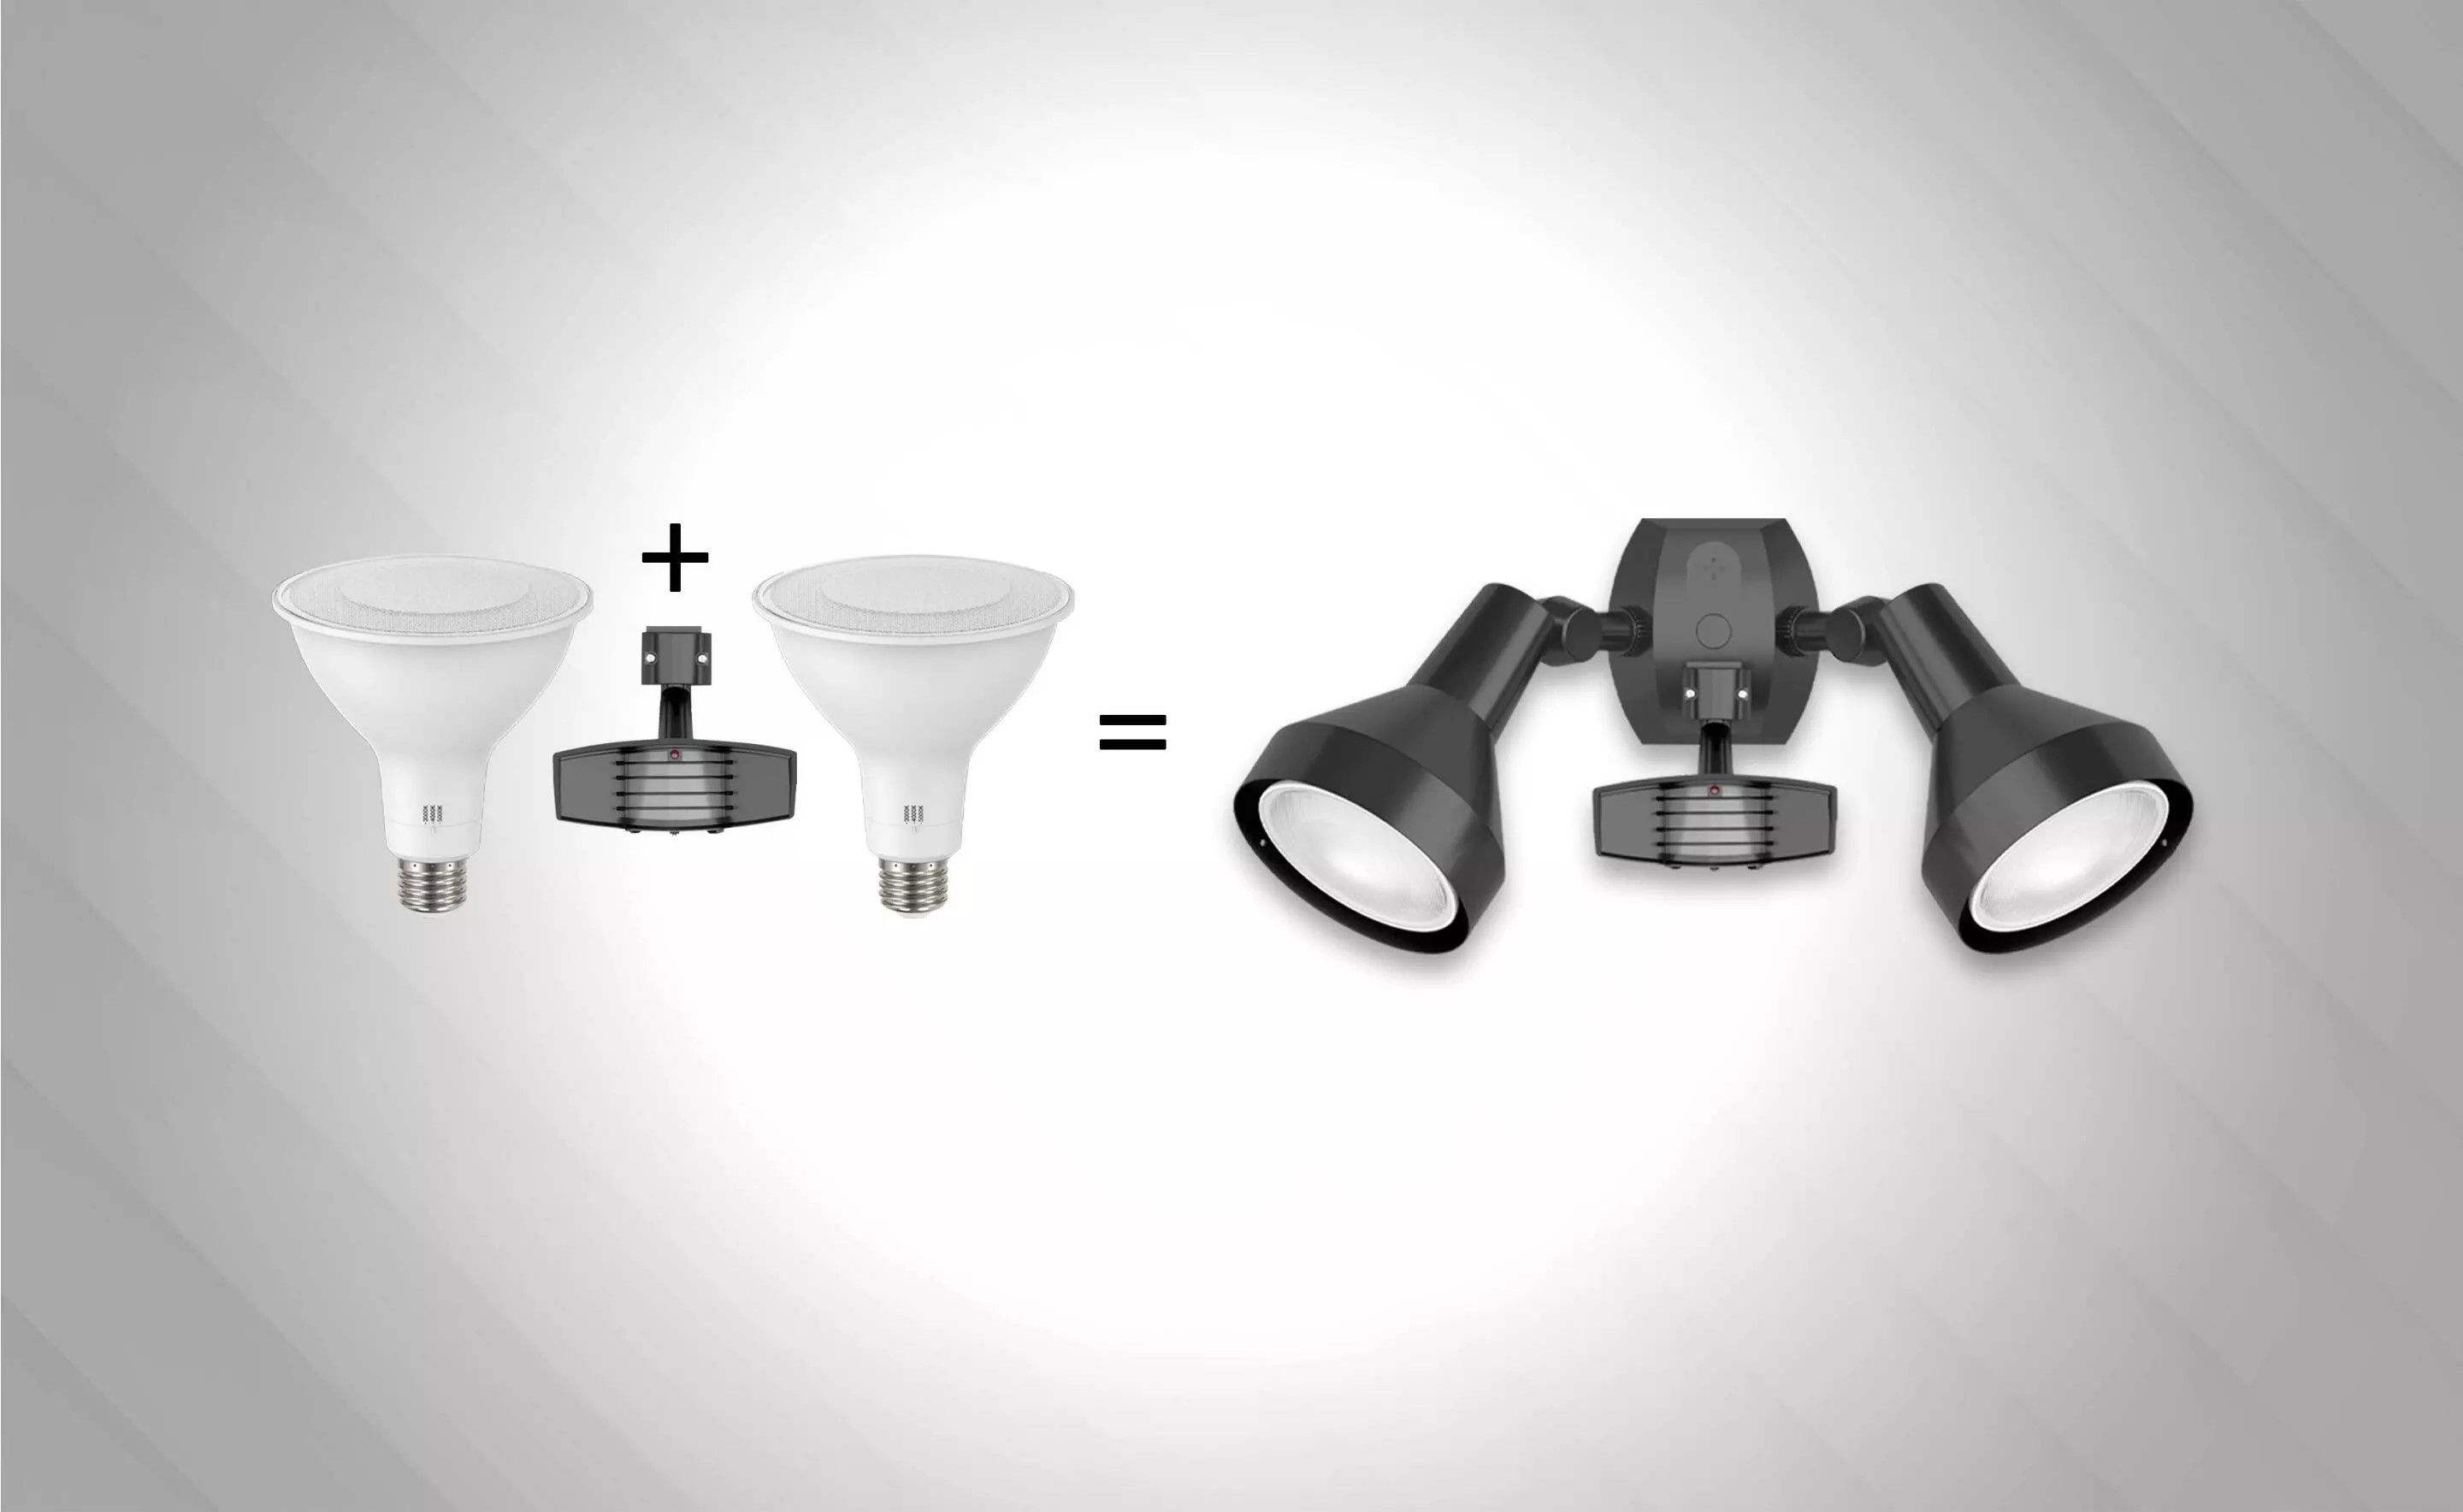 What Type Of Light Bulbs Are Compatible With The Stealth STL 110W Motion Detector, Especially LED Bulbs